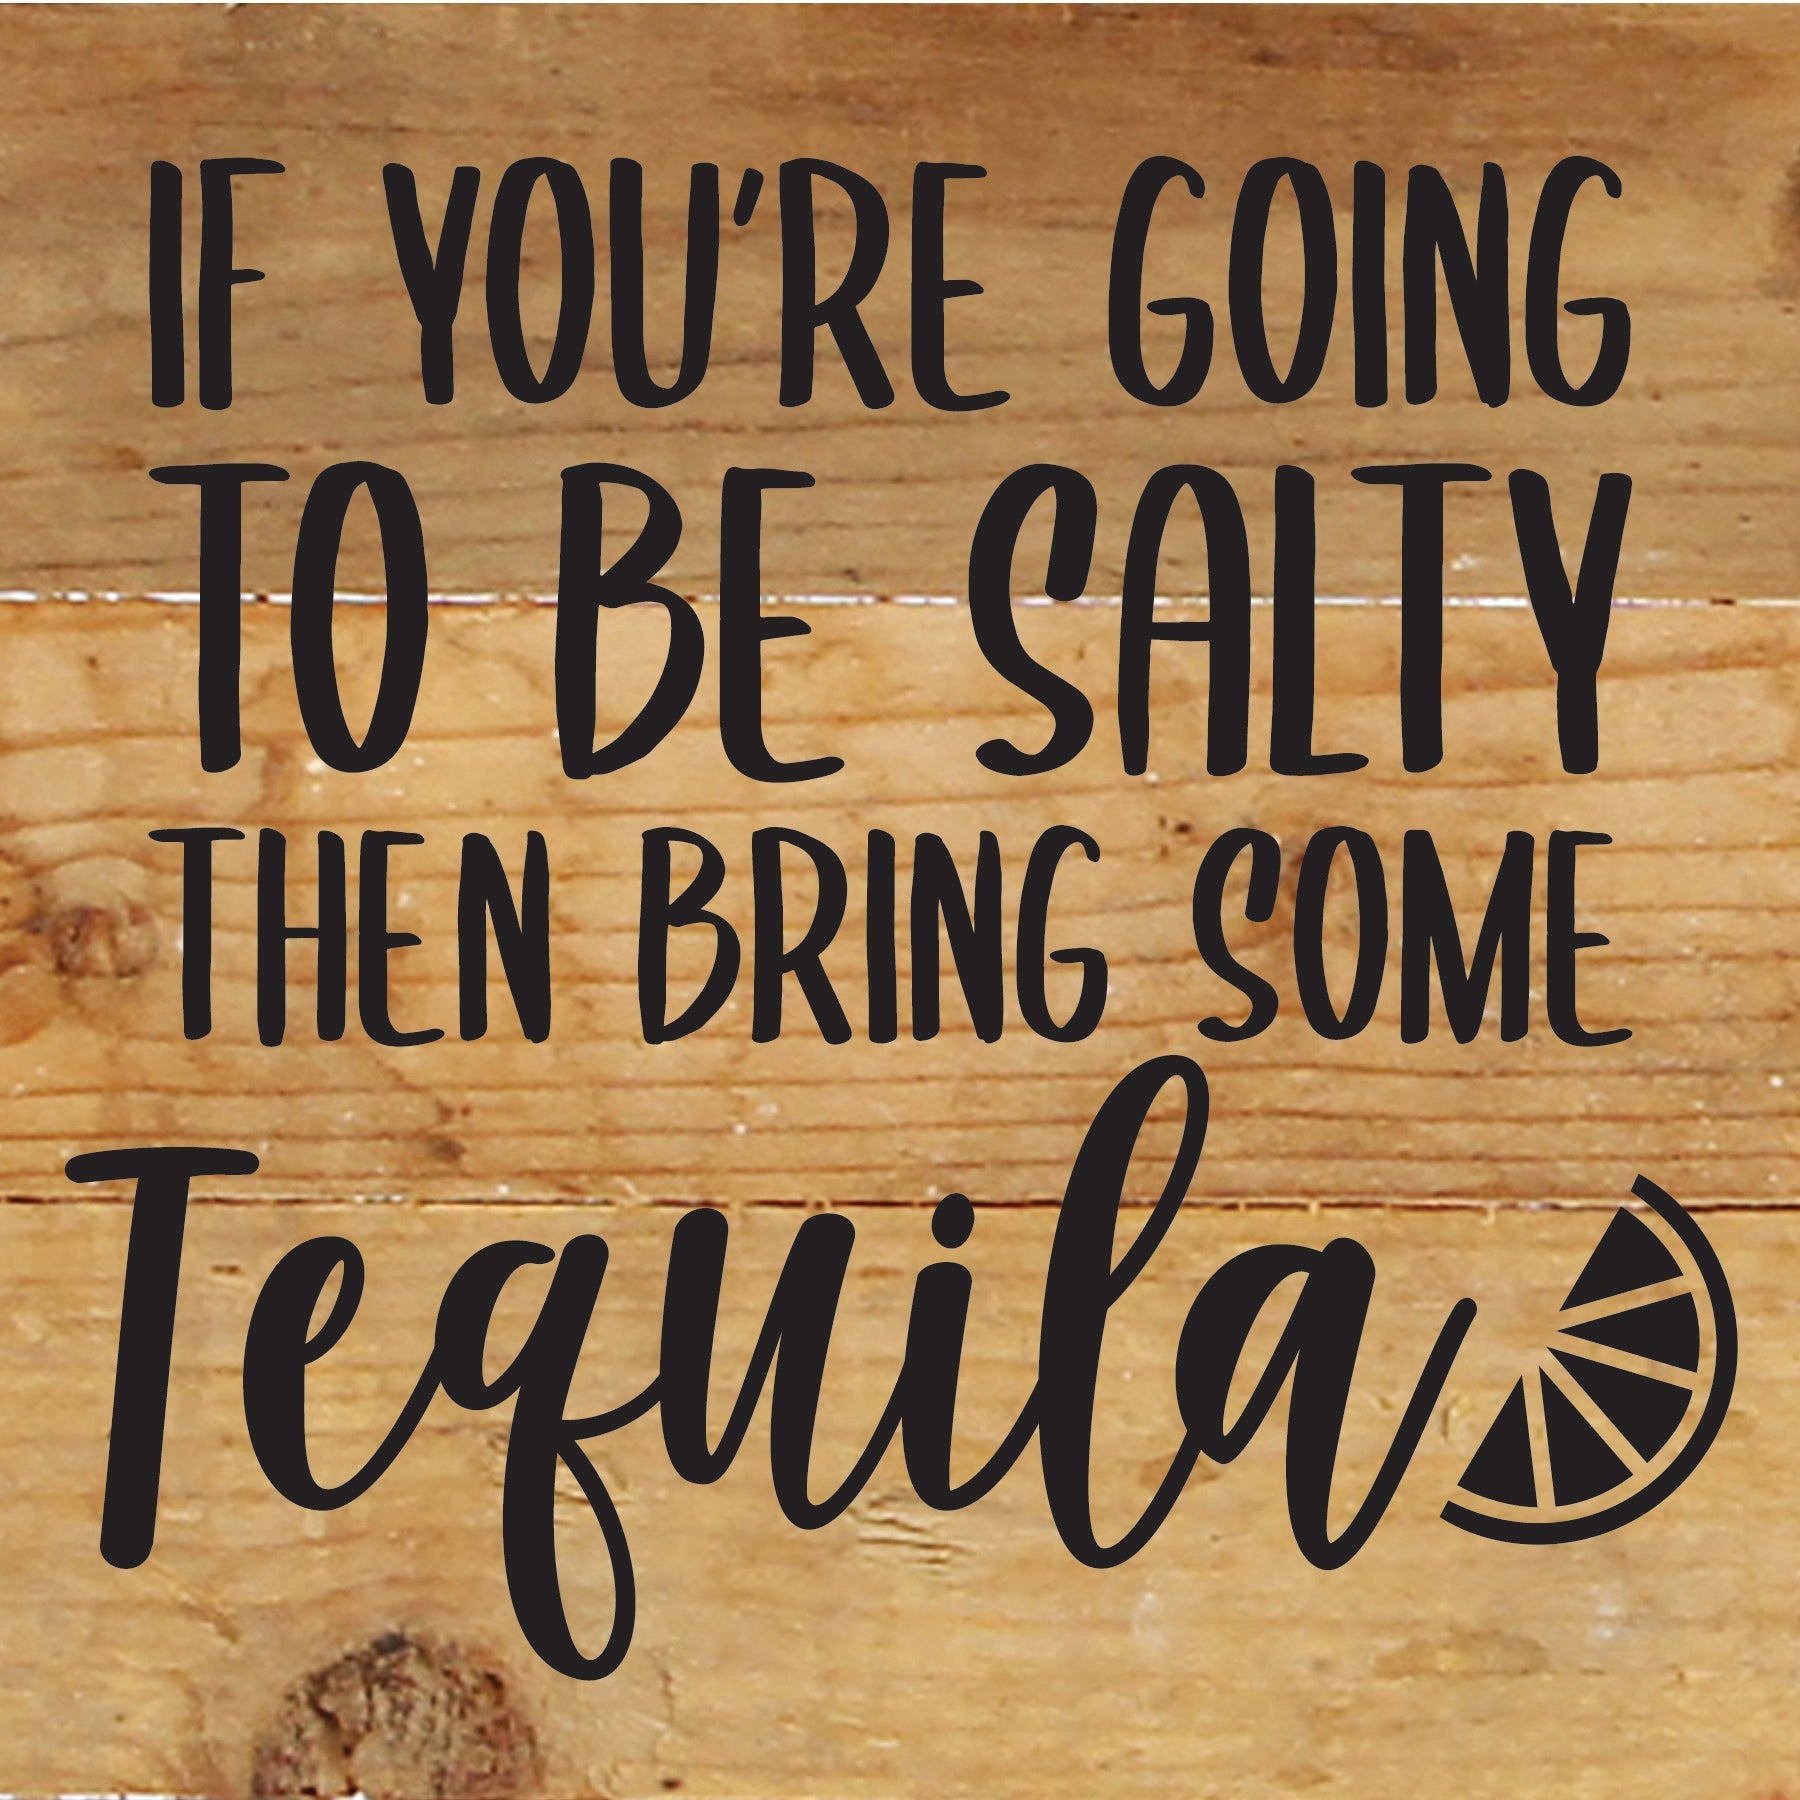 If you are going to be salty then bring some tequila / 6x6 Reclaimed Wood Sign